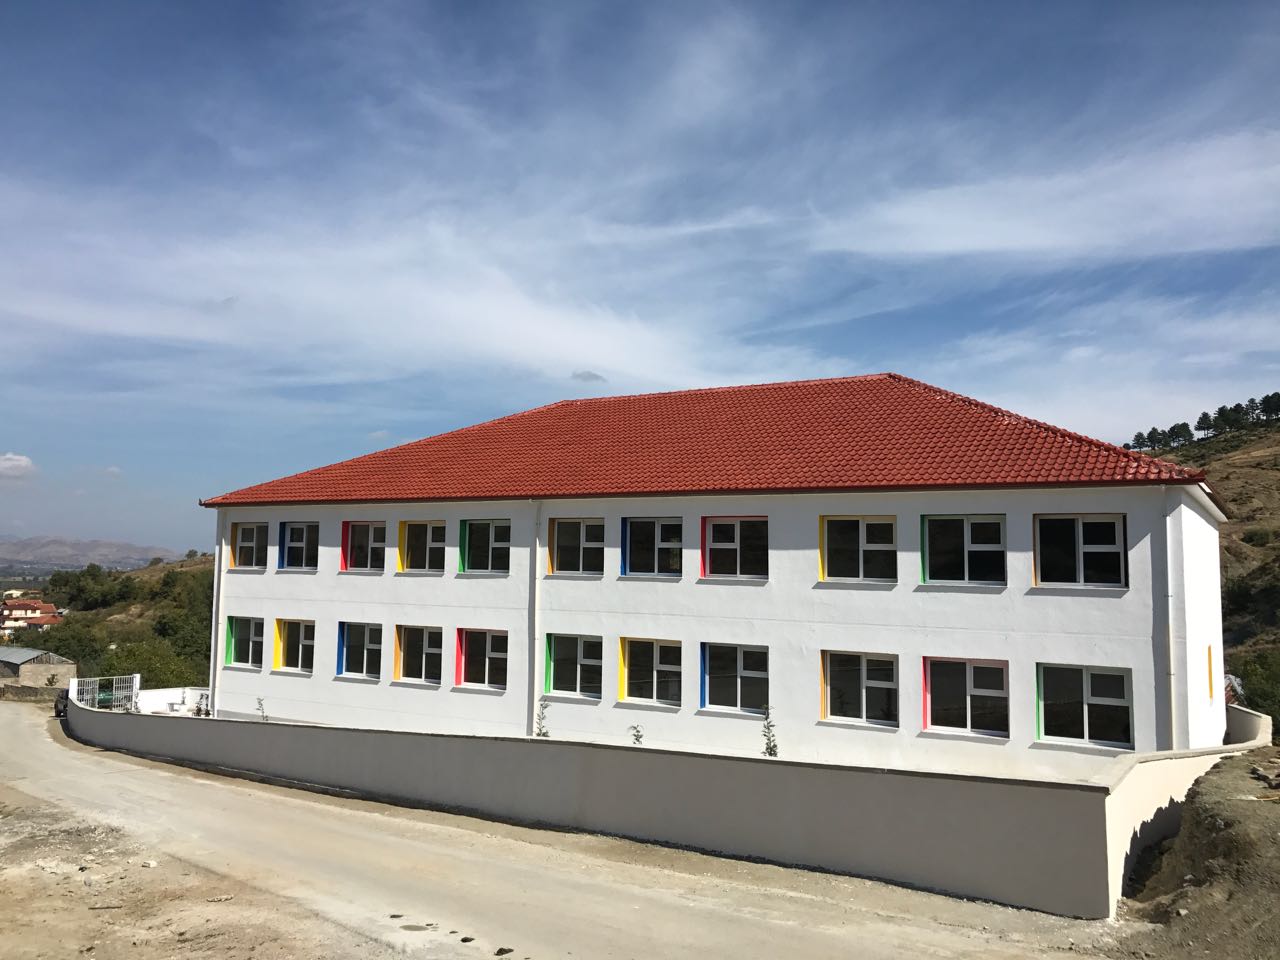 Construction of a new school in the village of Kamenice, Korce Municipality